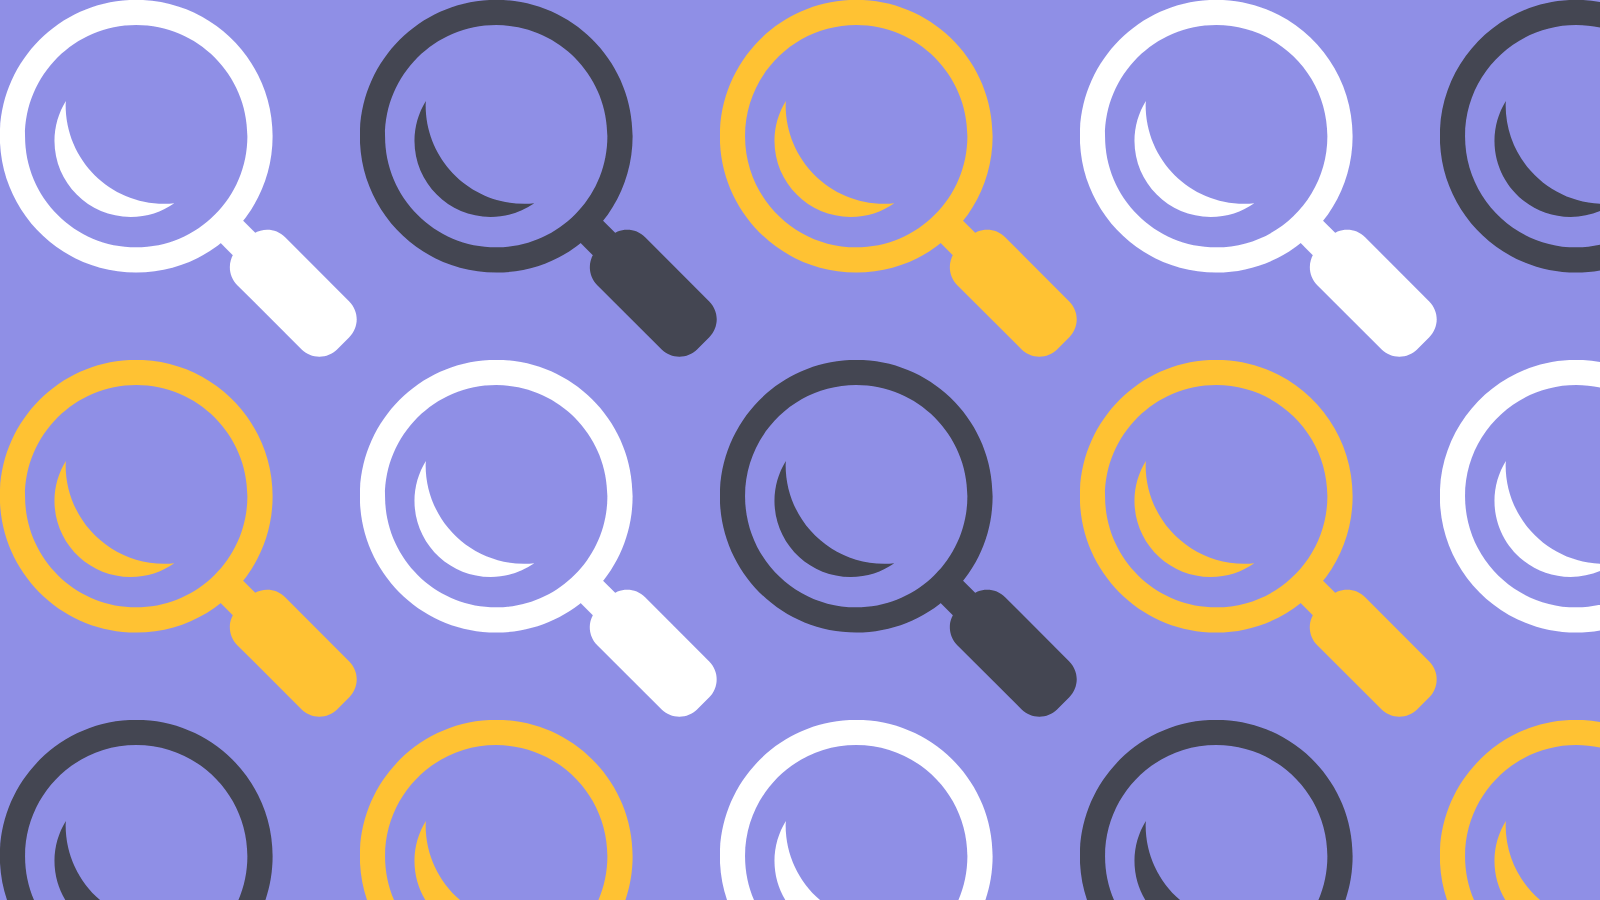 A repeating pattern of magnifying glasses